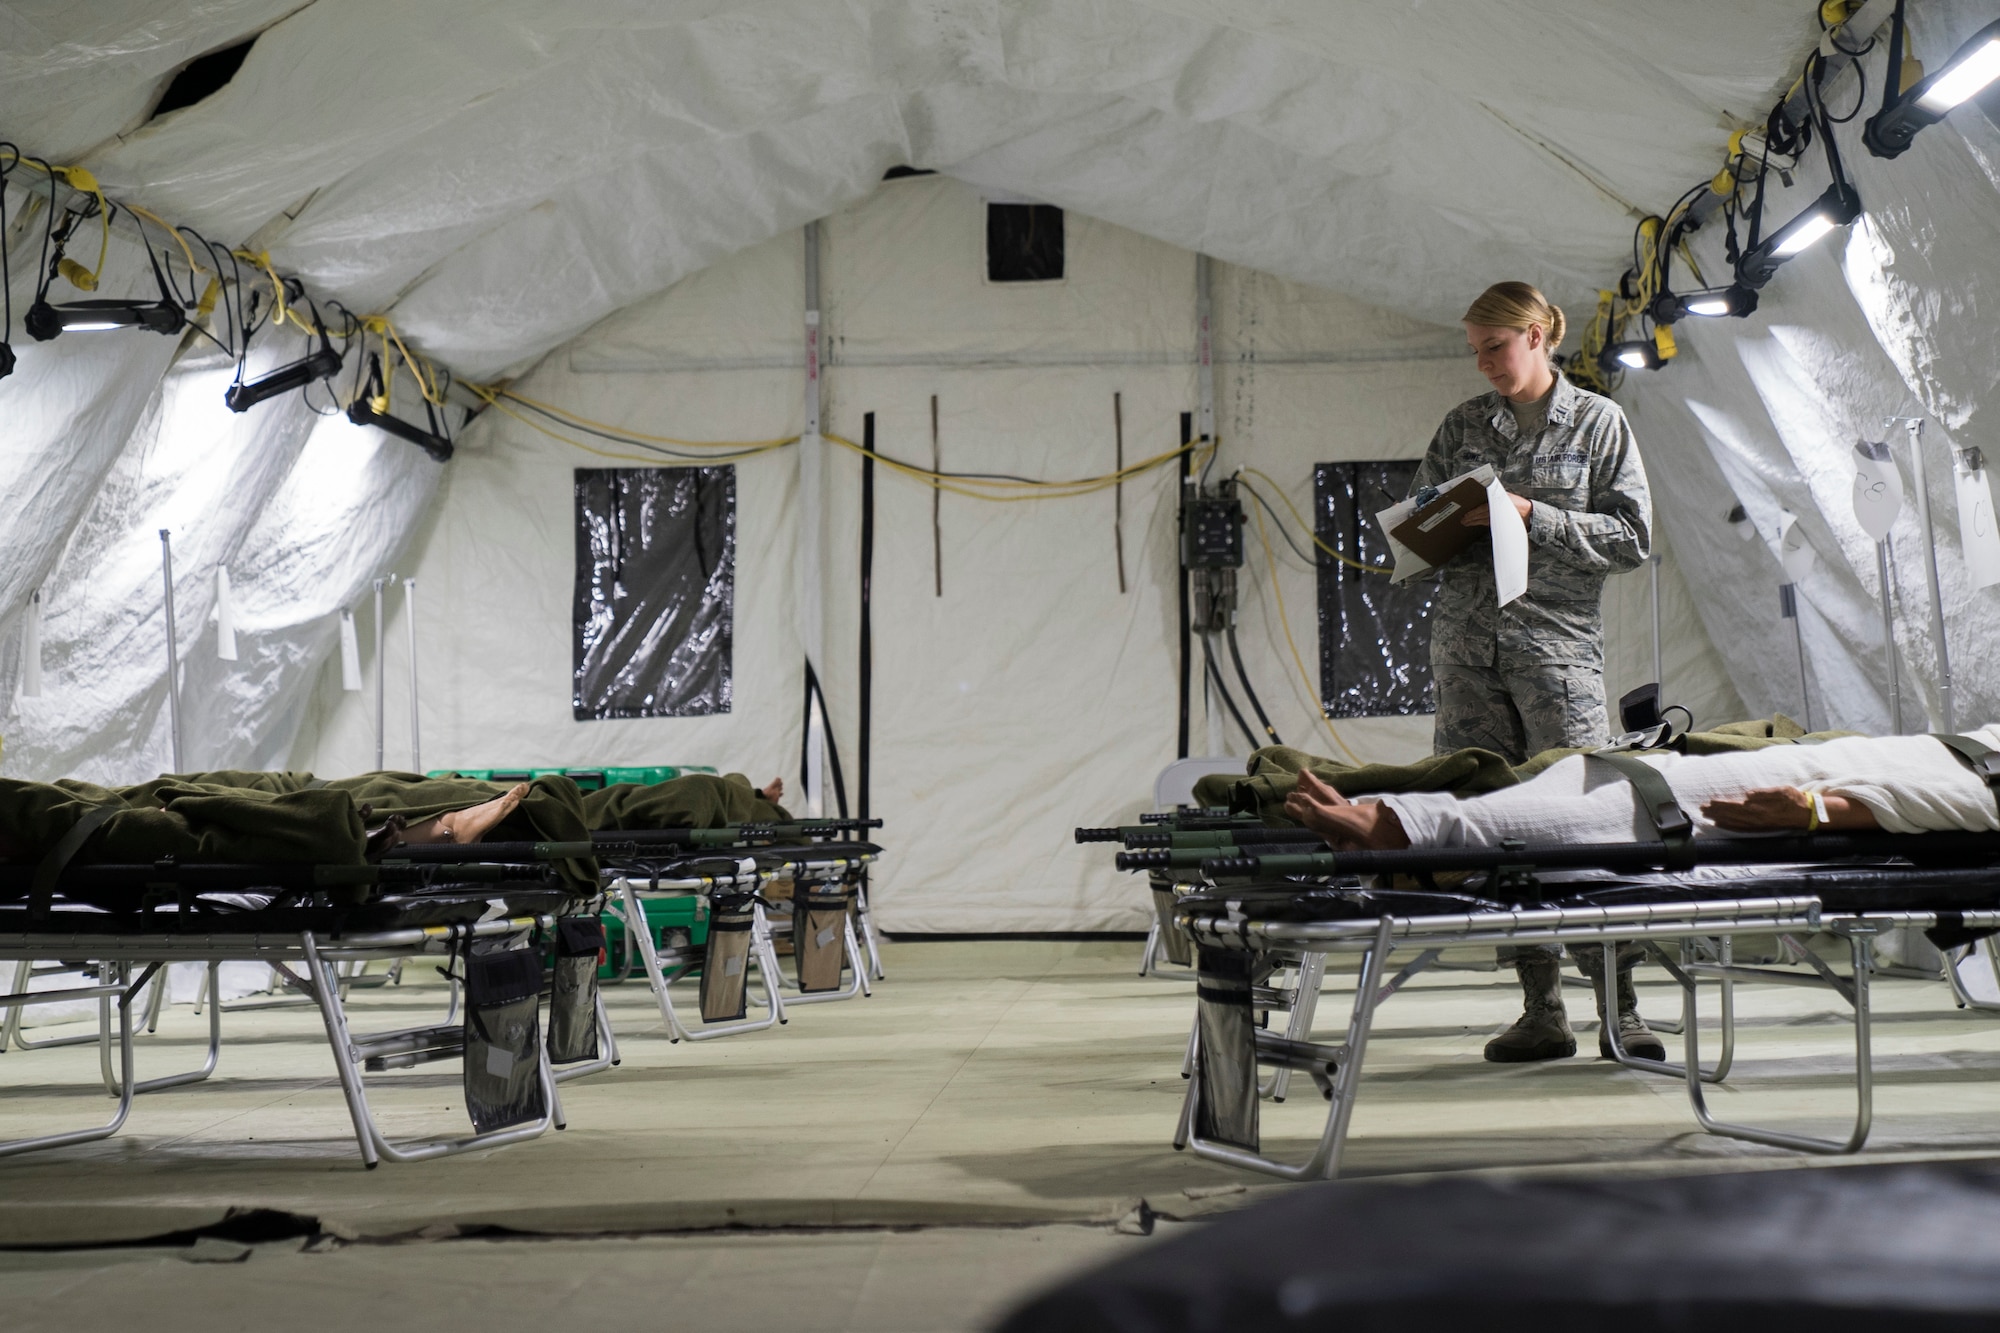 U.S. Air Force Reserve 1st Lt. Rebekah Howe, 60th Medical Group clinical nurse, reviews patient information inside an Air Force Expeditionary Medical Support System tent during Exercise Ultimate Caduceus 2018 at Travis Air Force Base, California, Aug. 22, 2018. Ultimate Caduceus 2018 is an annual patient movement exercise designed to test the ability of U.S. Transportation Command to provide medical evacuation. (U.S. Air Force photo by Jamal D. Sutter)